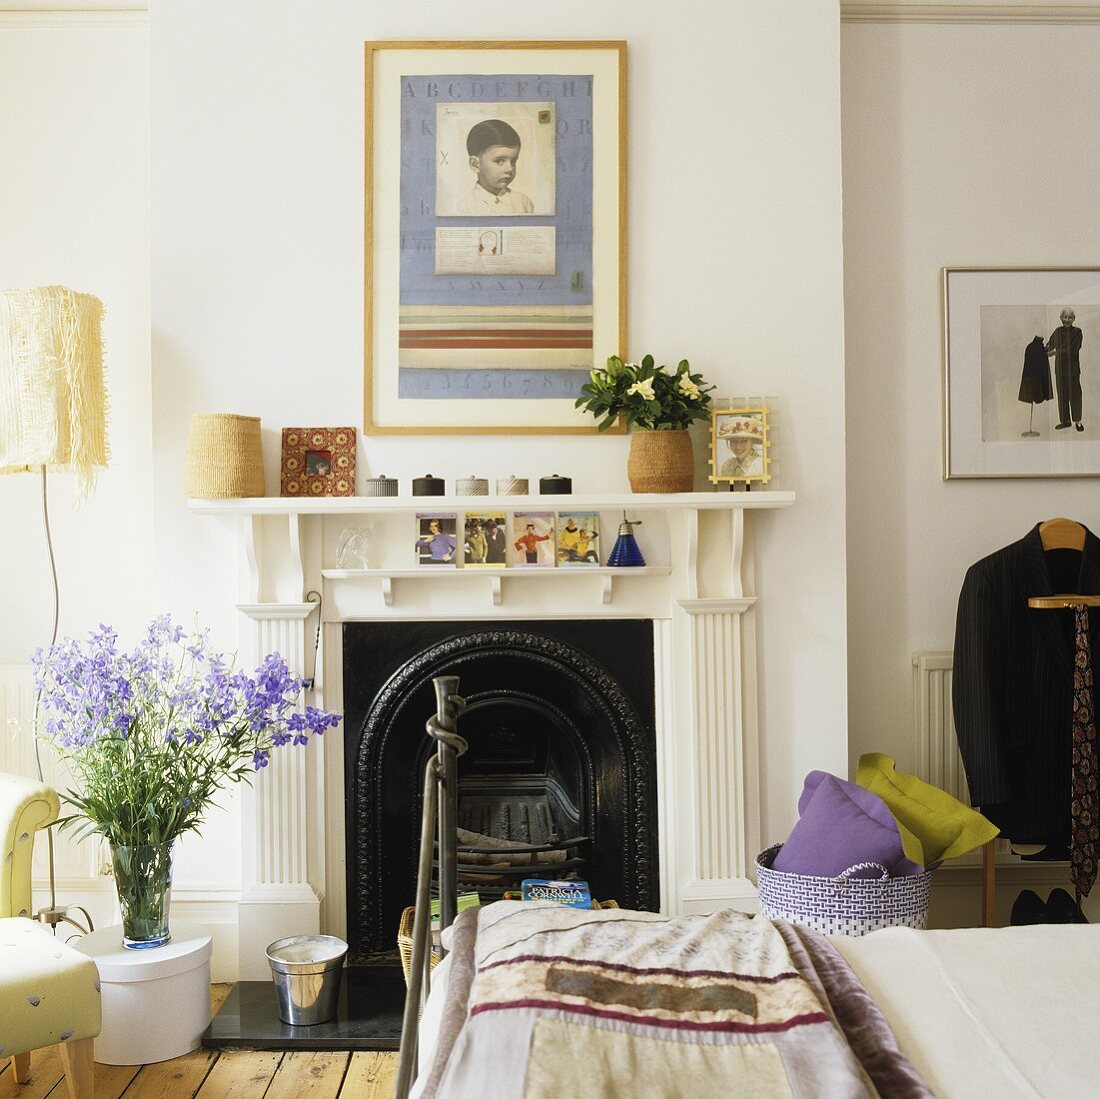 A fireplace with a white mantelpiece in a bedroom